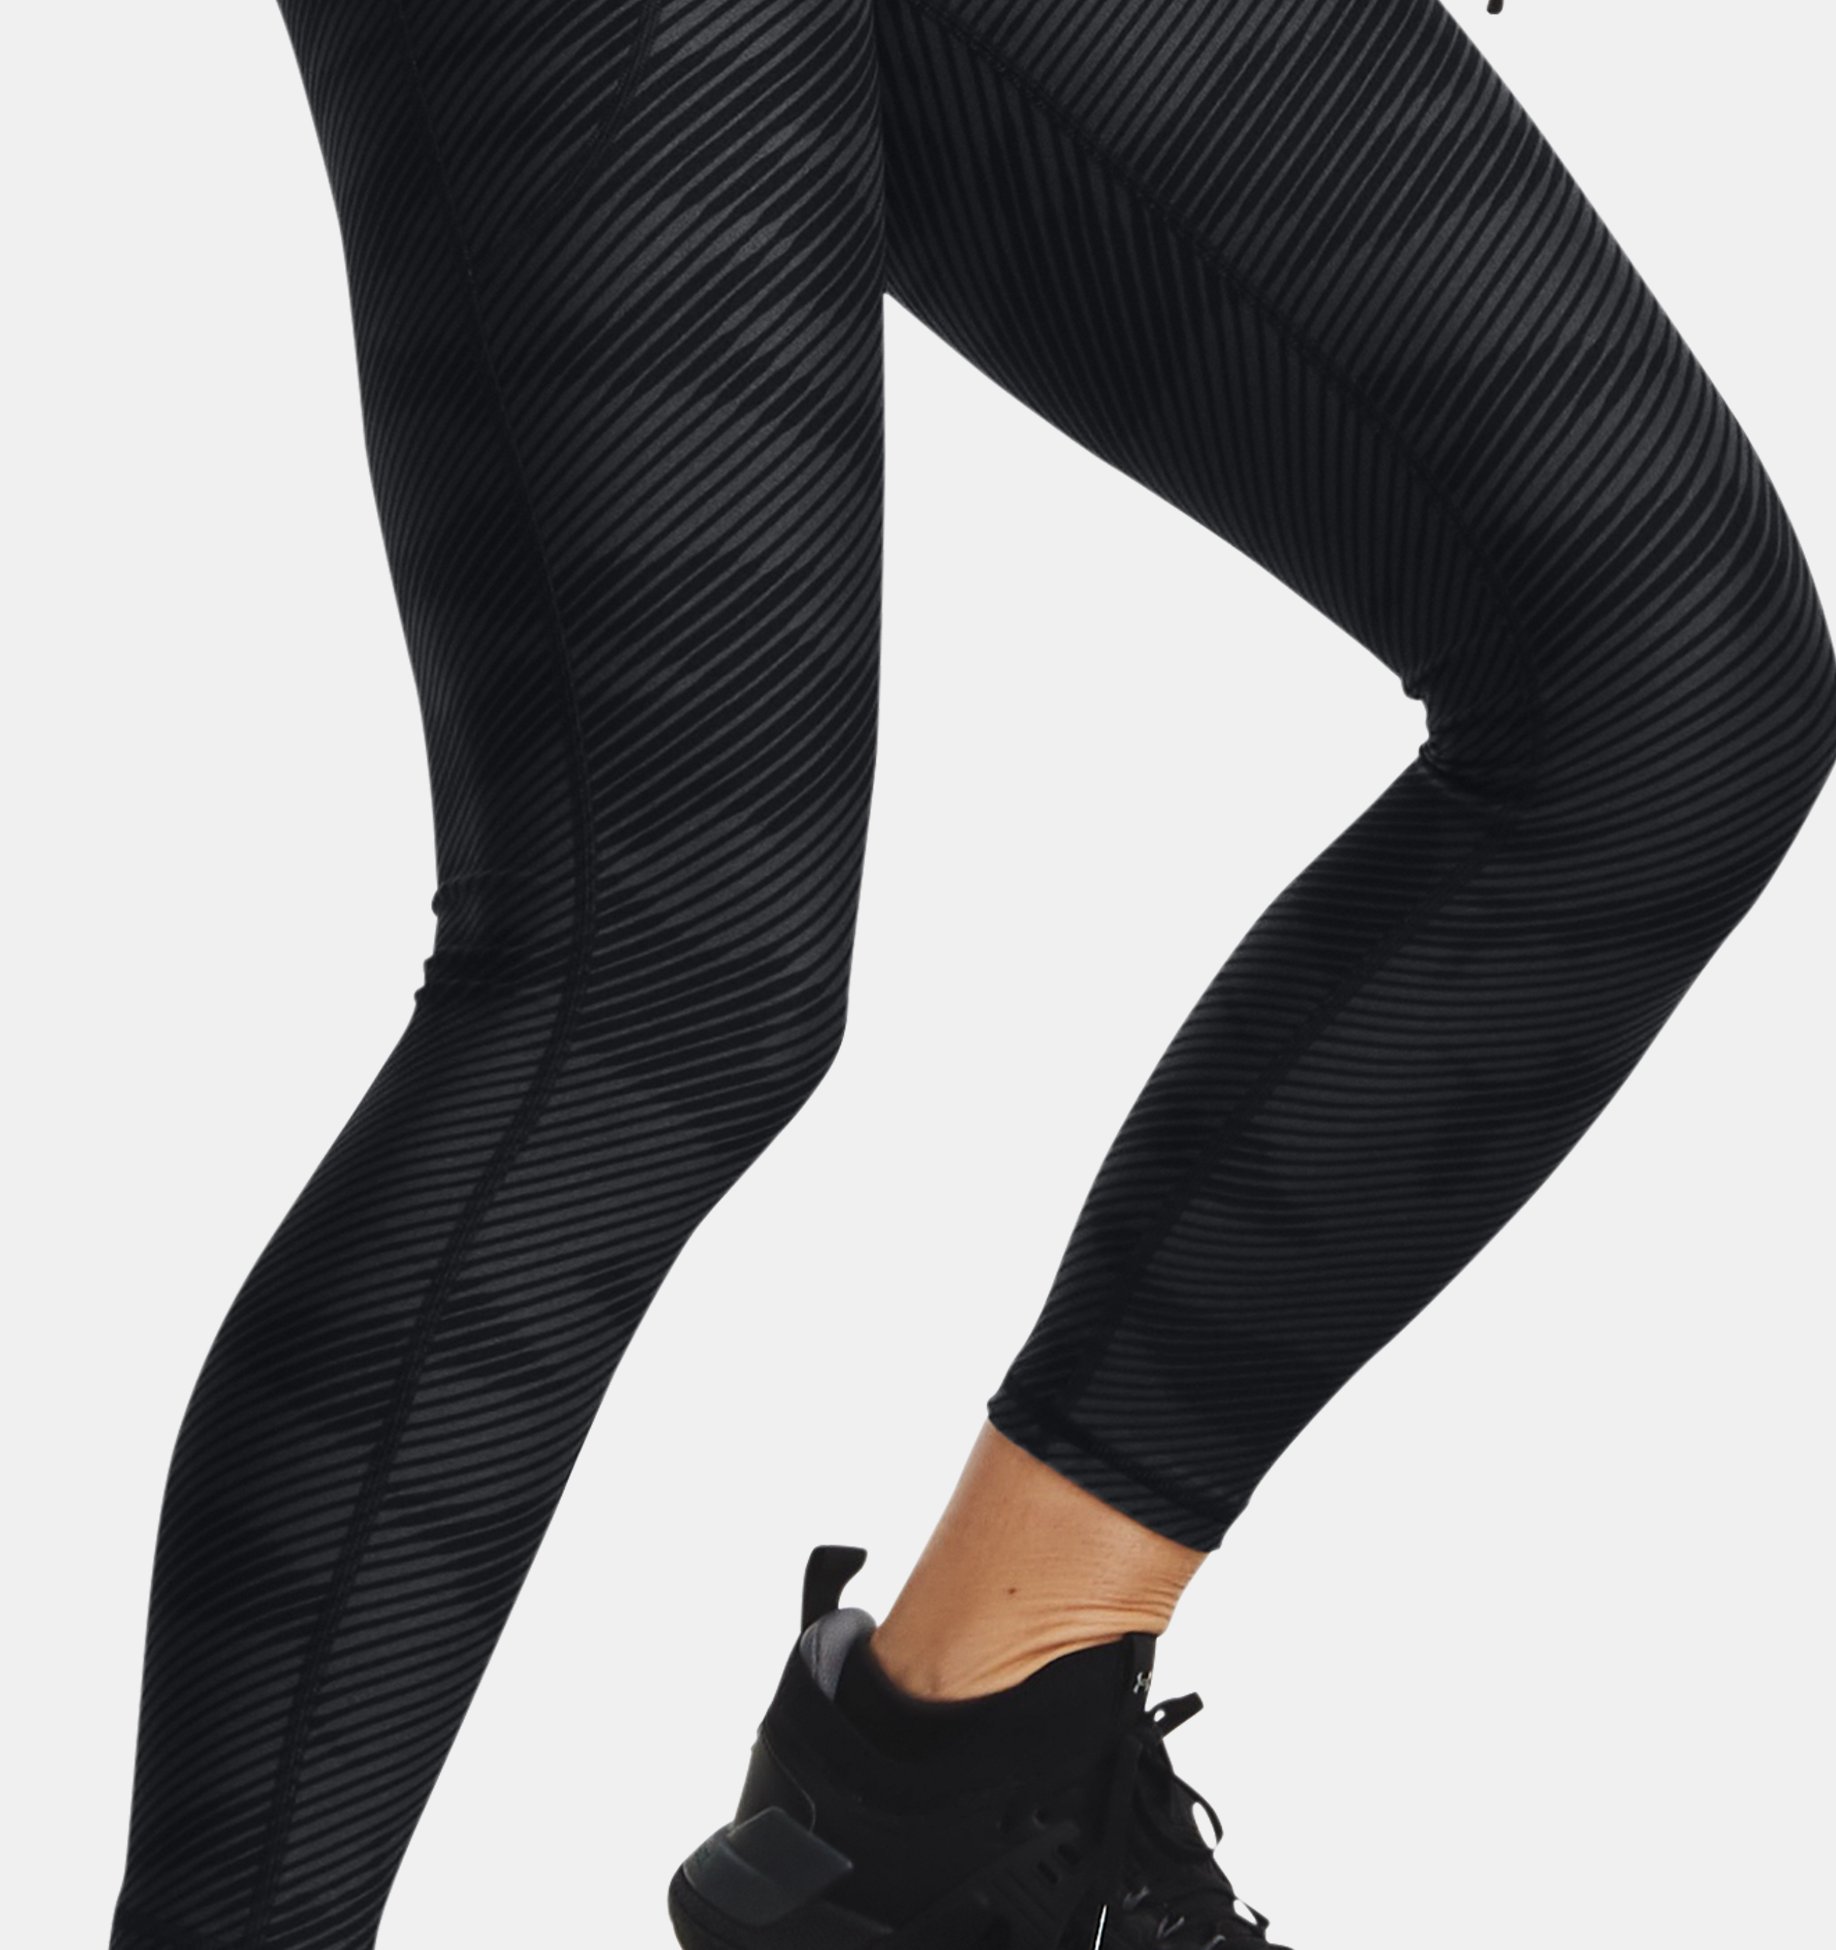 Under Armour Fly by Printed Compression Capri Speed Jungle 1248730